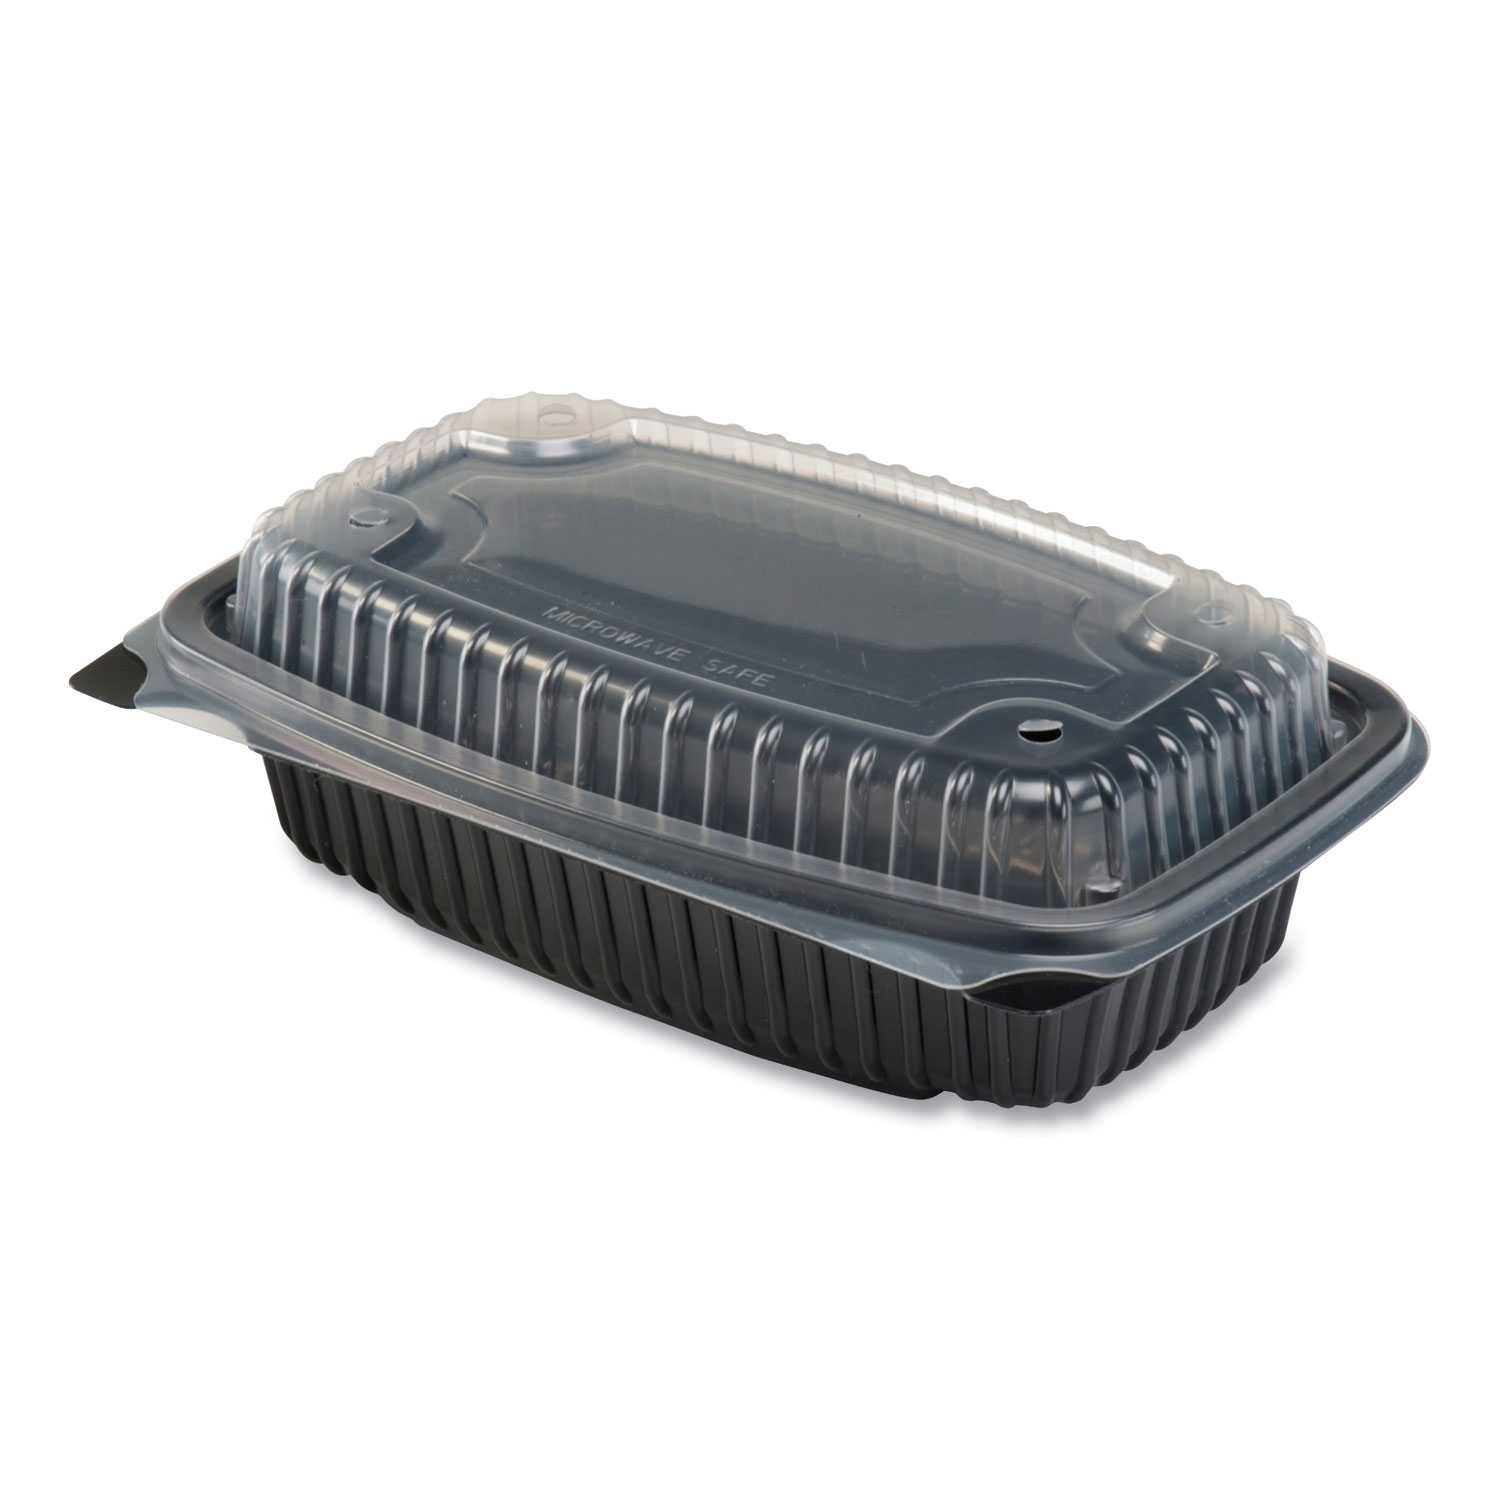  Anchor Packaging 4696911 Culinary Lites Microwavable Container, 34 oz, 9.55 x 6.65 x 3.04, Clear/Black, 100/Carton (ANZ4696911) 